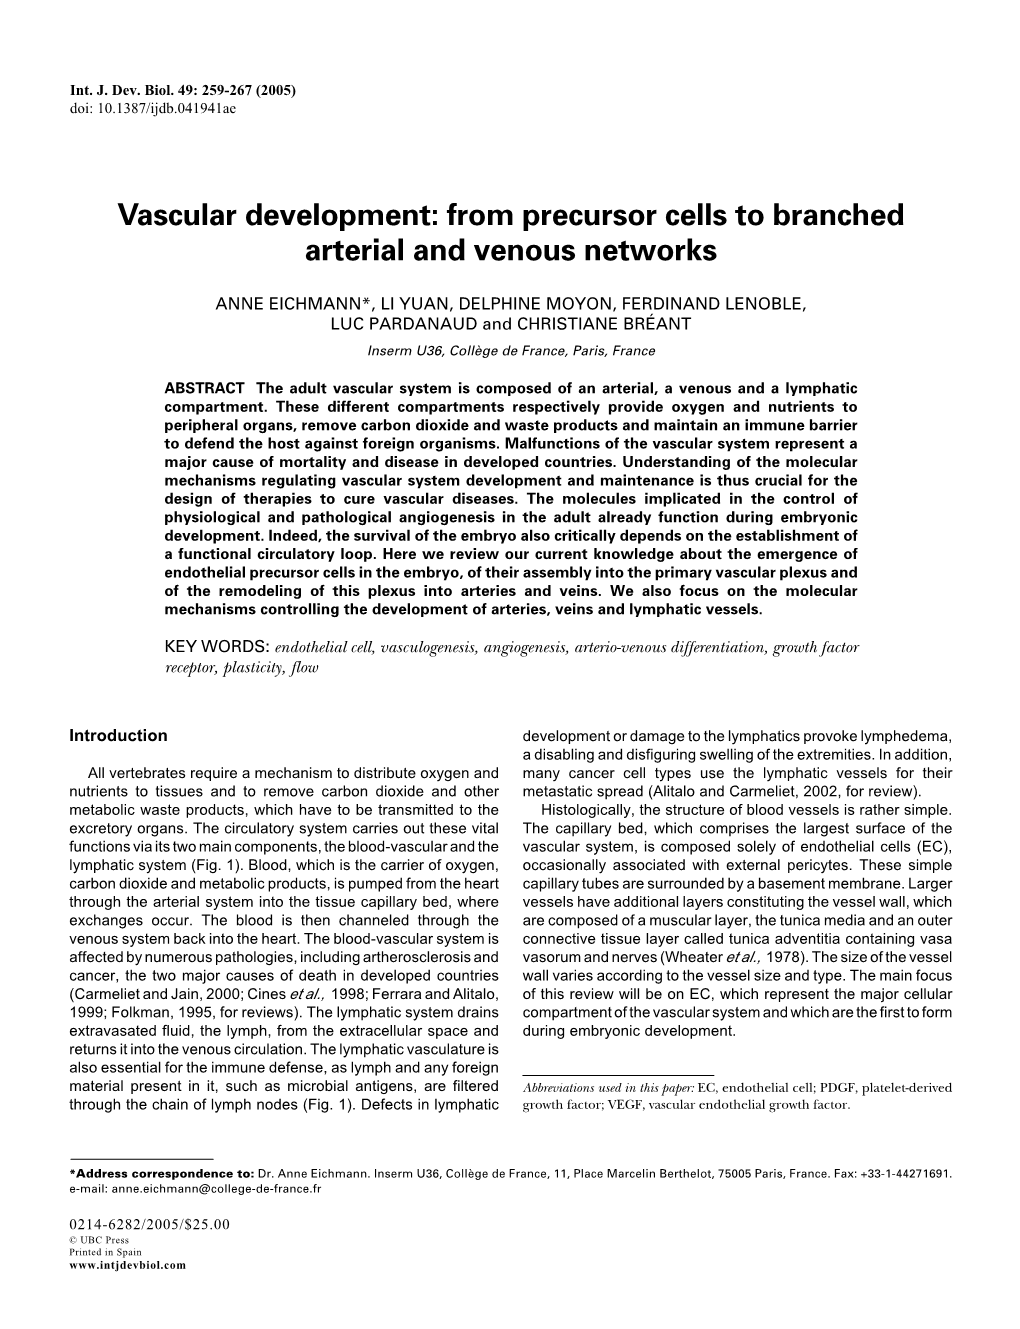 Vascular Development: from Precursor Cells to Branched Arterial and Venous Networks